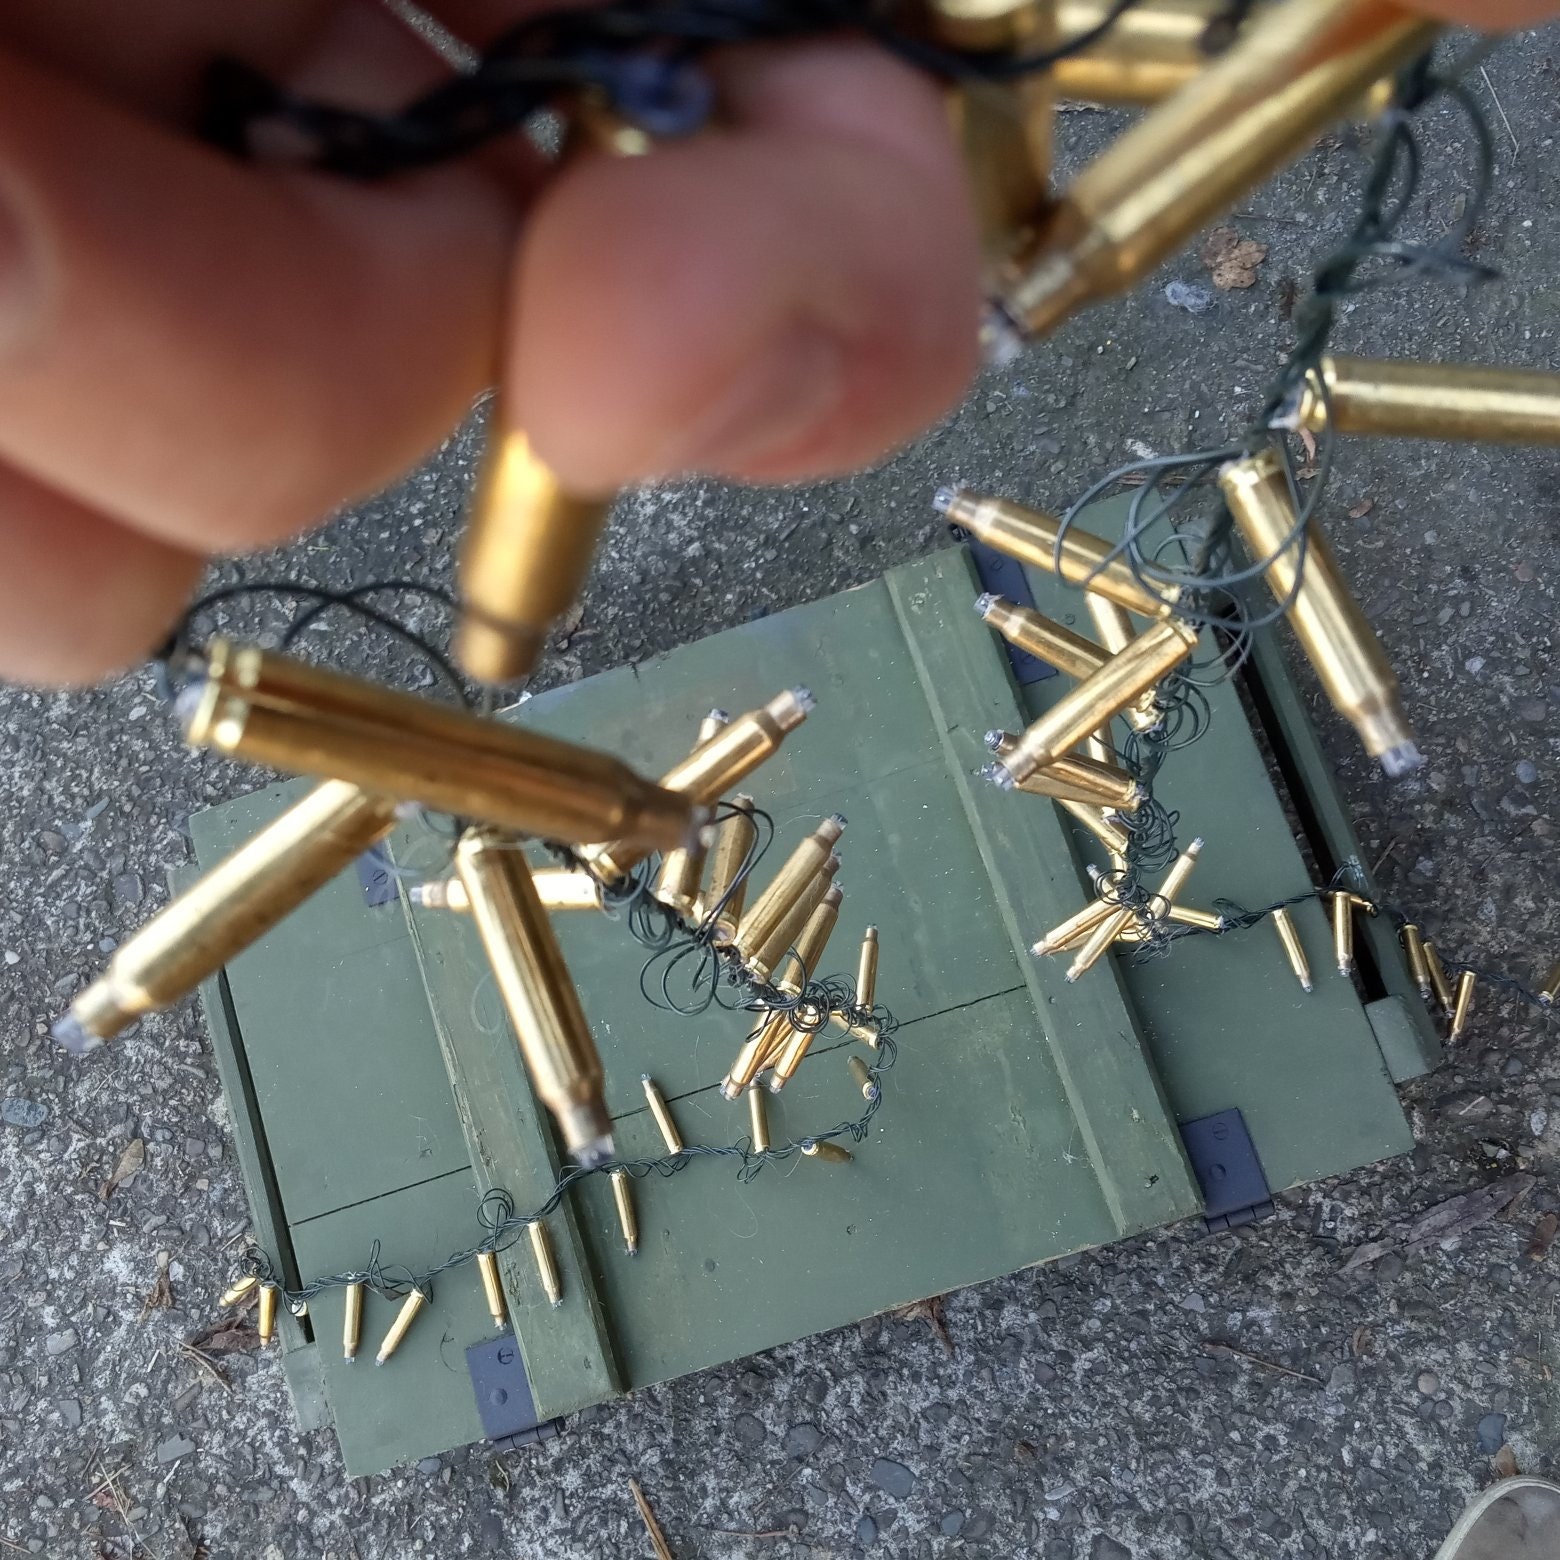 How to make fake bullets: Have spent - Cosplay of Hyn May